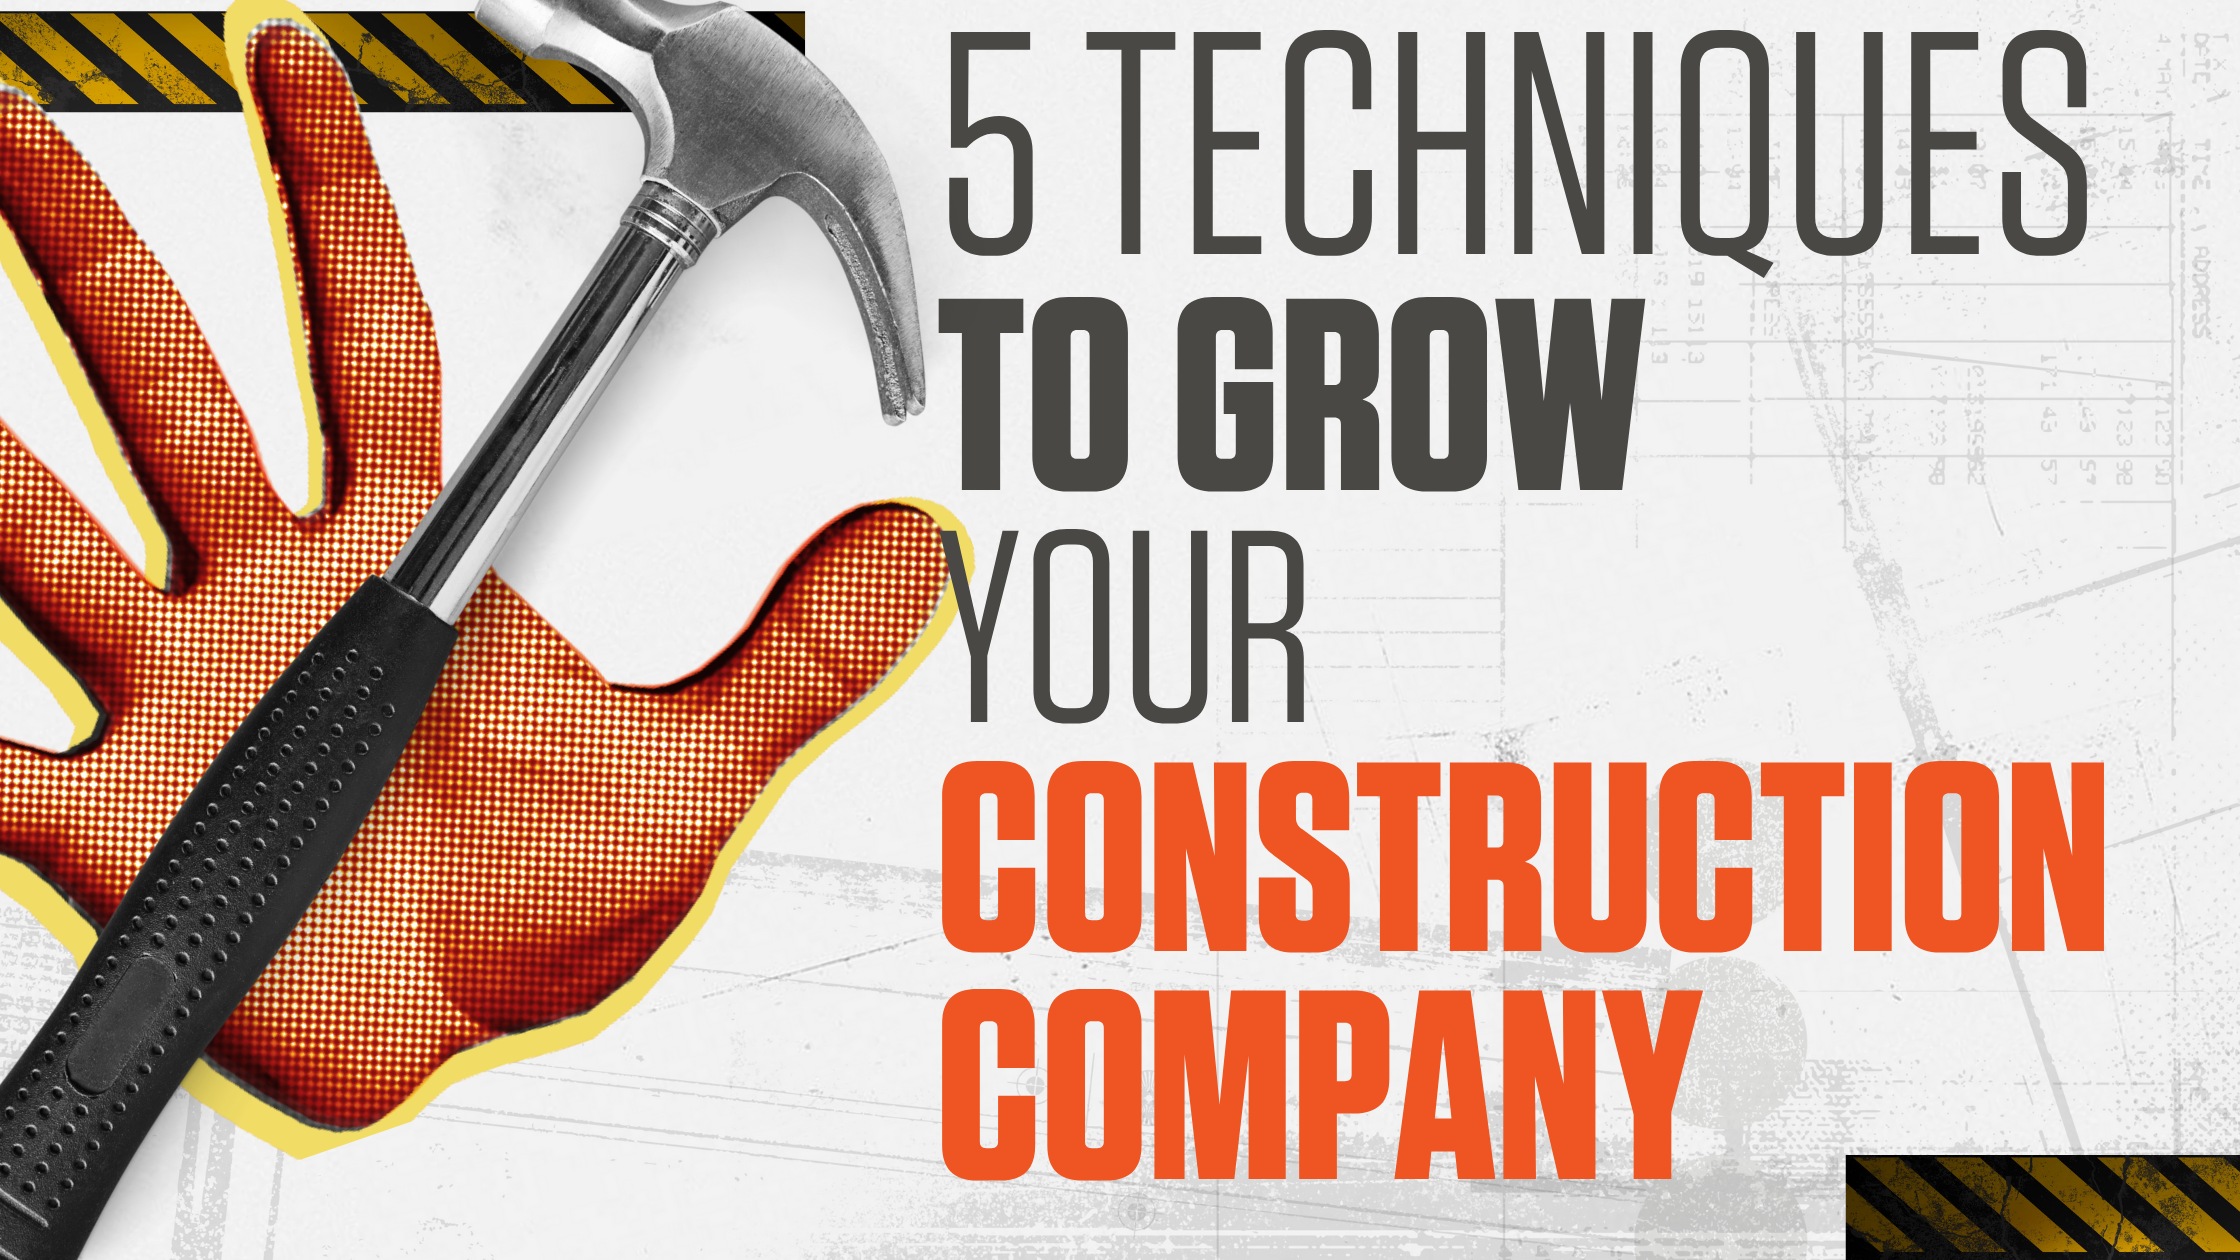 5 Techniques To Grow Your Construction Company